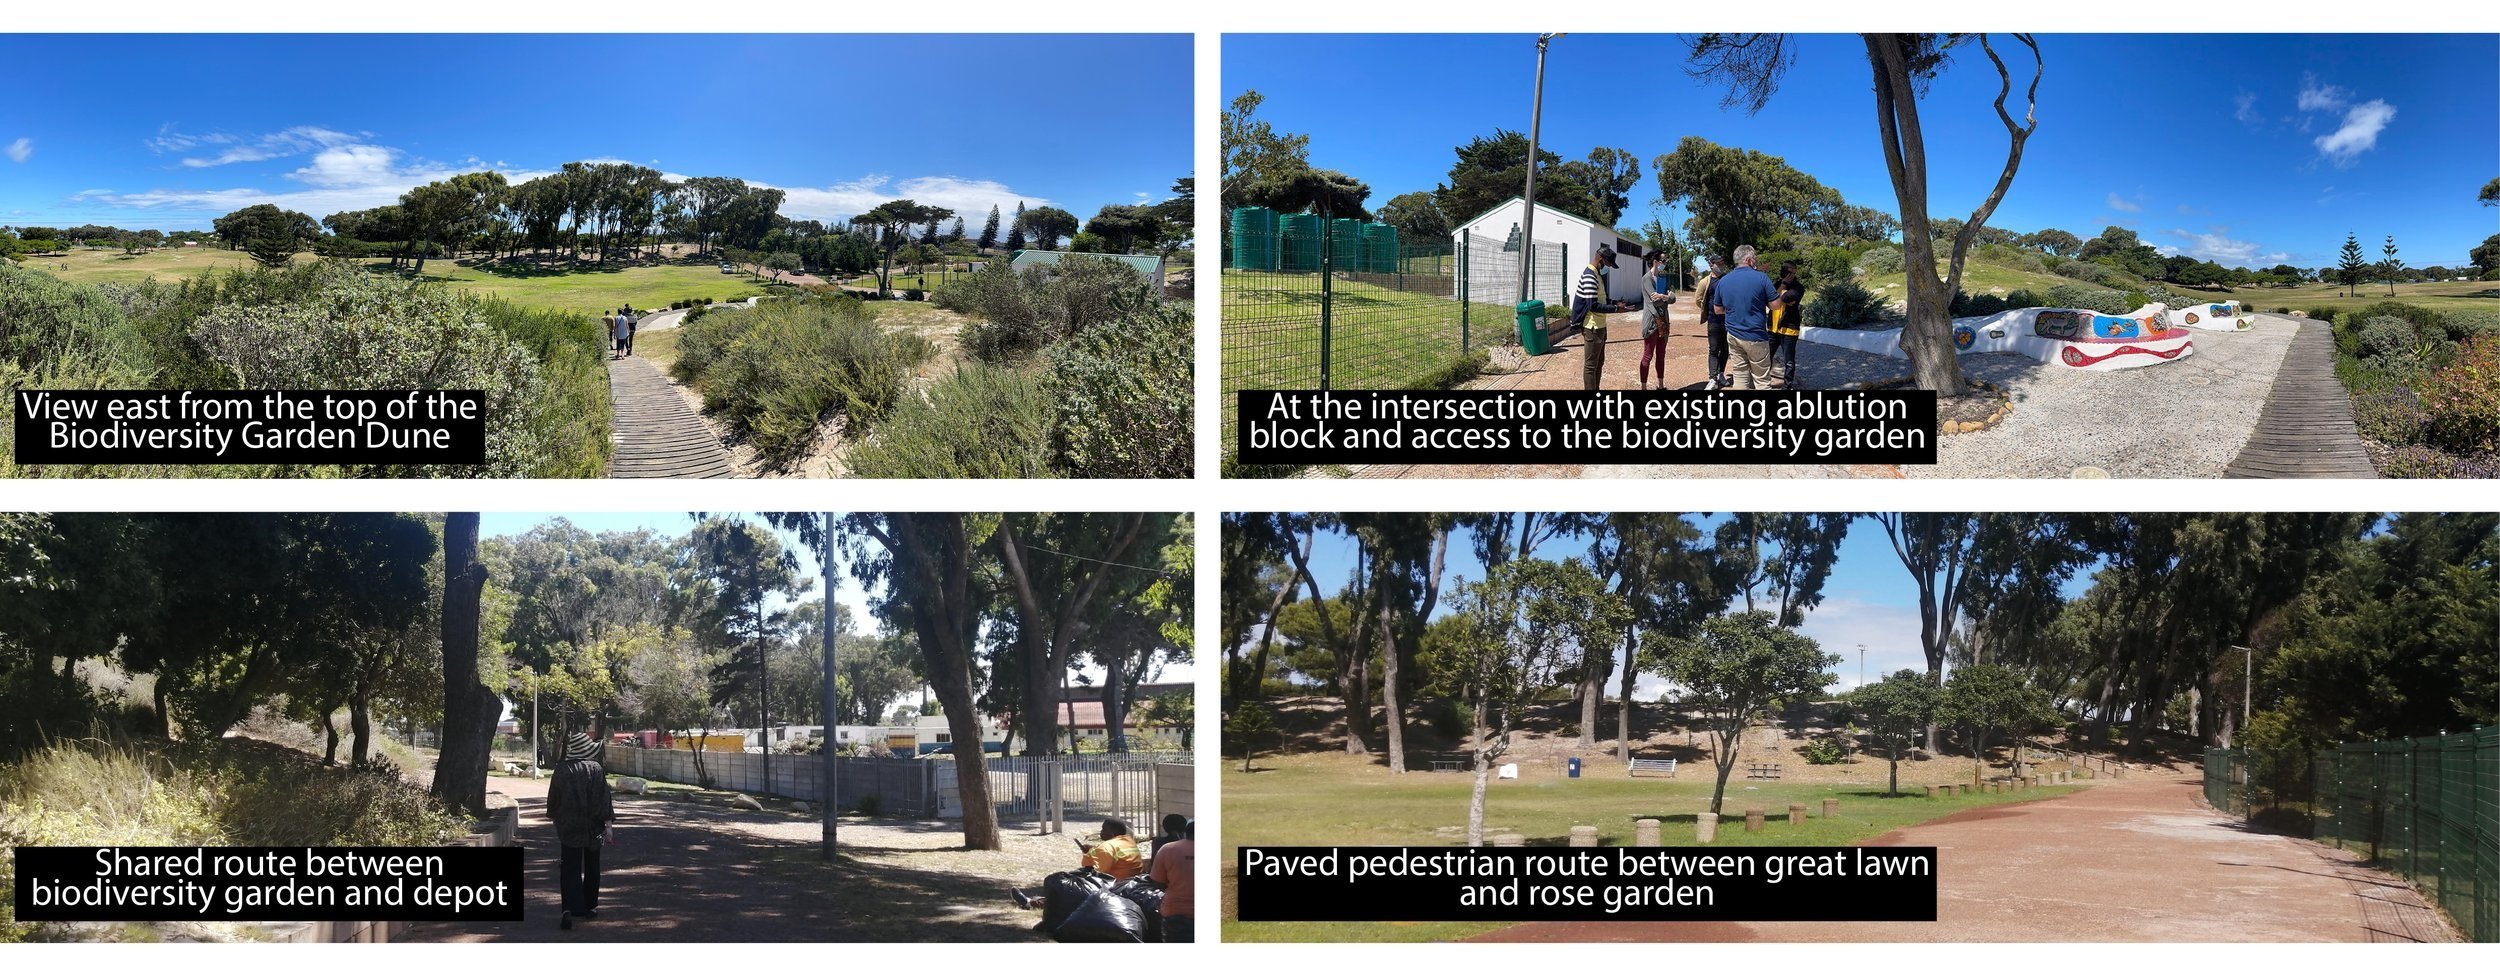  TERRA+ Landscape Architects are vital in designing the Westridge Park Environmental Education and Multi-purpose Visitor Centre in Mitchell’s Plain. The project emphasizes integration, safety, accessibility, and creating educational spaces within a s